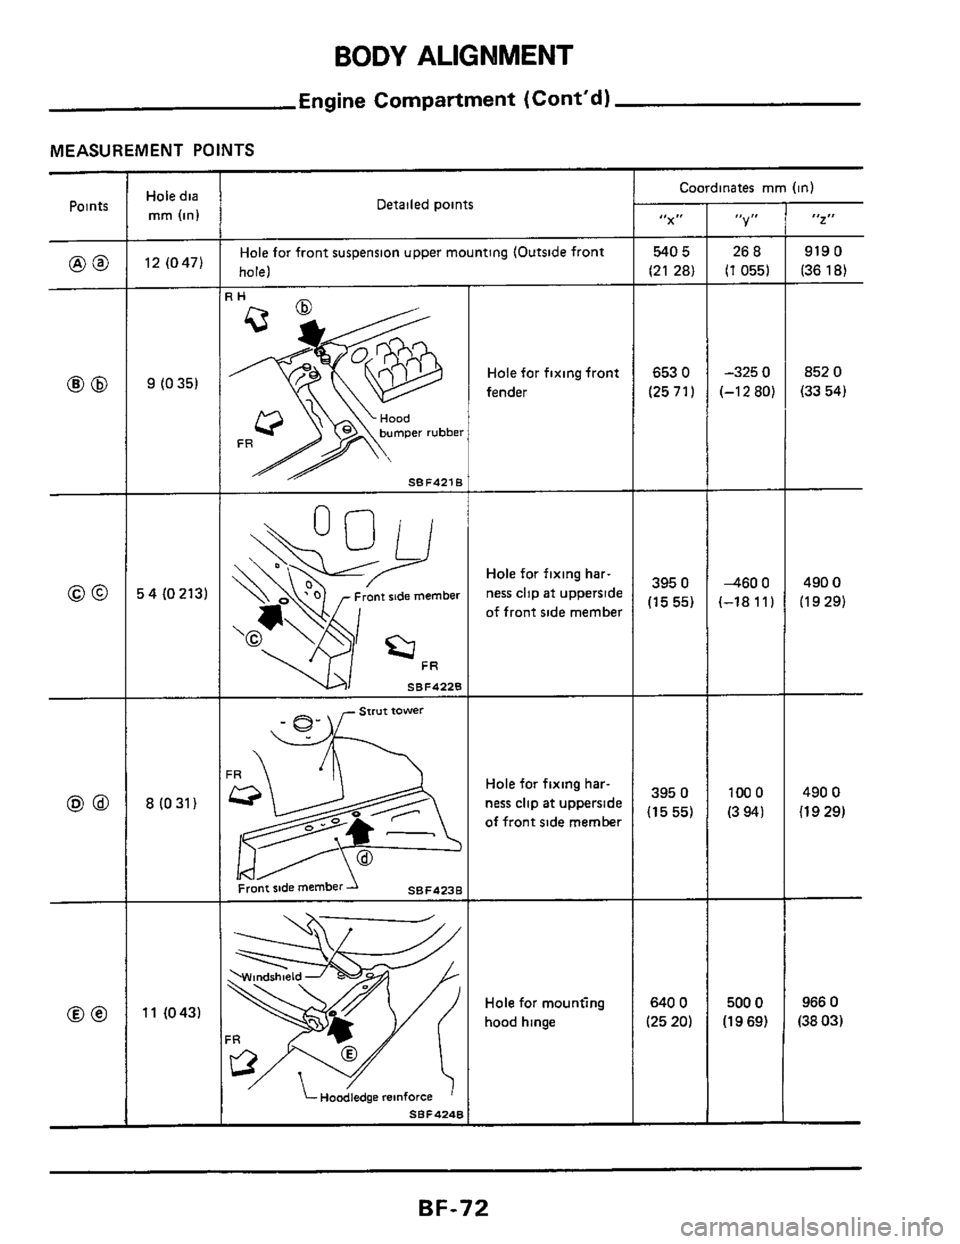 NISSAN 300ZX 1984 Z31 Body Manual PDF BODY ALIGNMENT 
Engine Compartment  (Cont’d) 
MEASUREMENT POINTS 
Points Hole dia 
mm (in) Detailed  points Coordinates mm (in) 
“X” I, I, 2 
540 5 
(21 28) - 
653 0 
(2571) 
26 a 
(1 0551 - 
-3